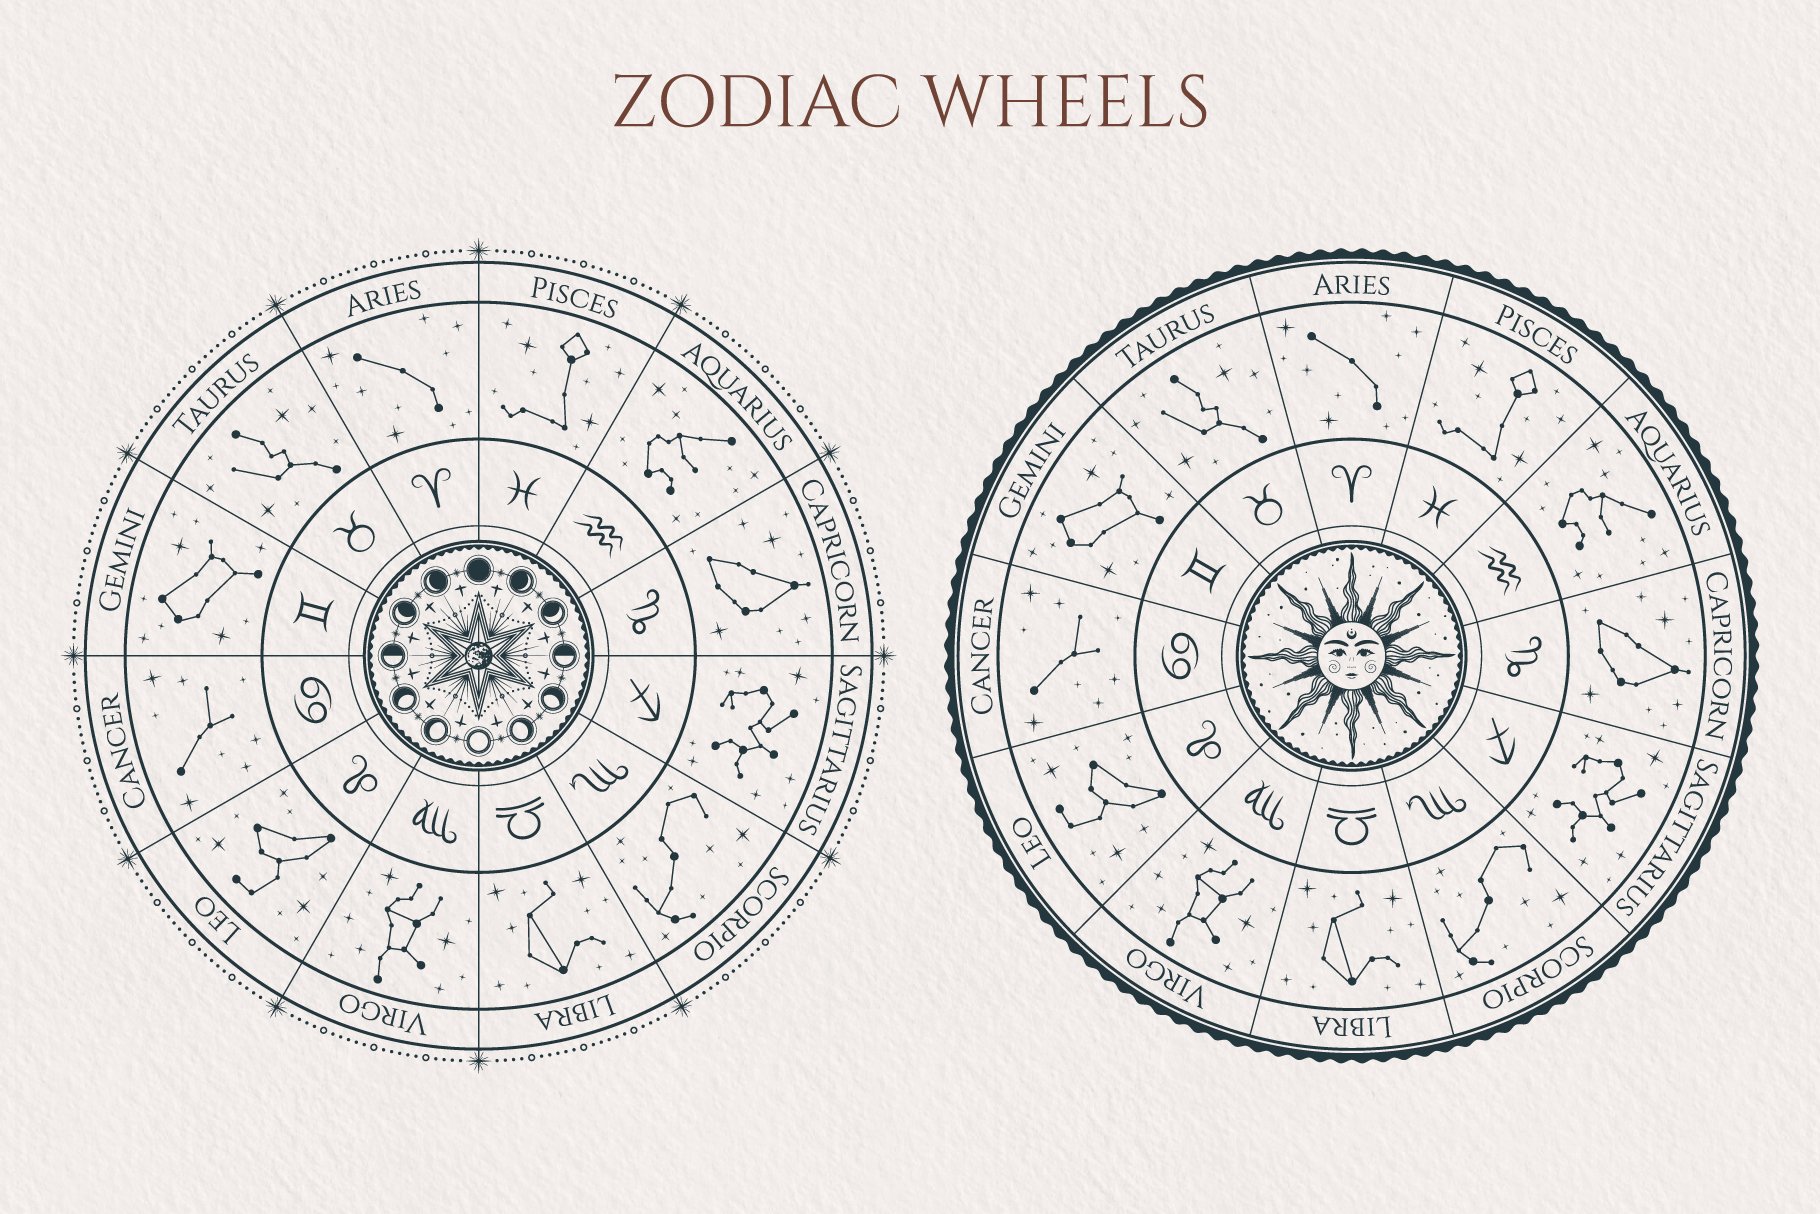 Zodiac Wheel & Wheel of the Year preview image.